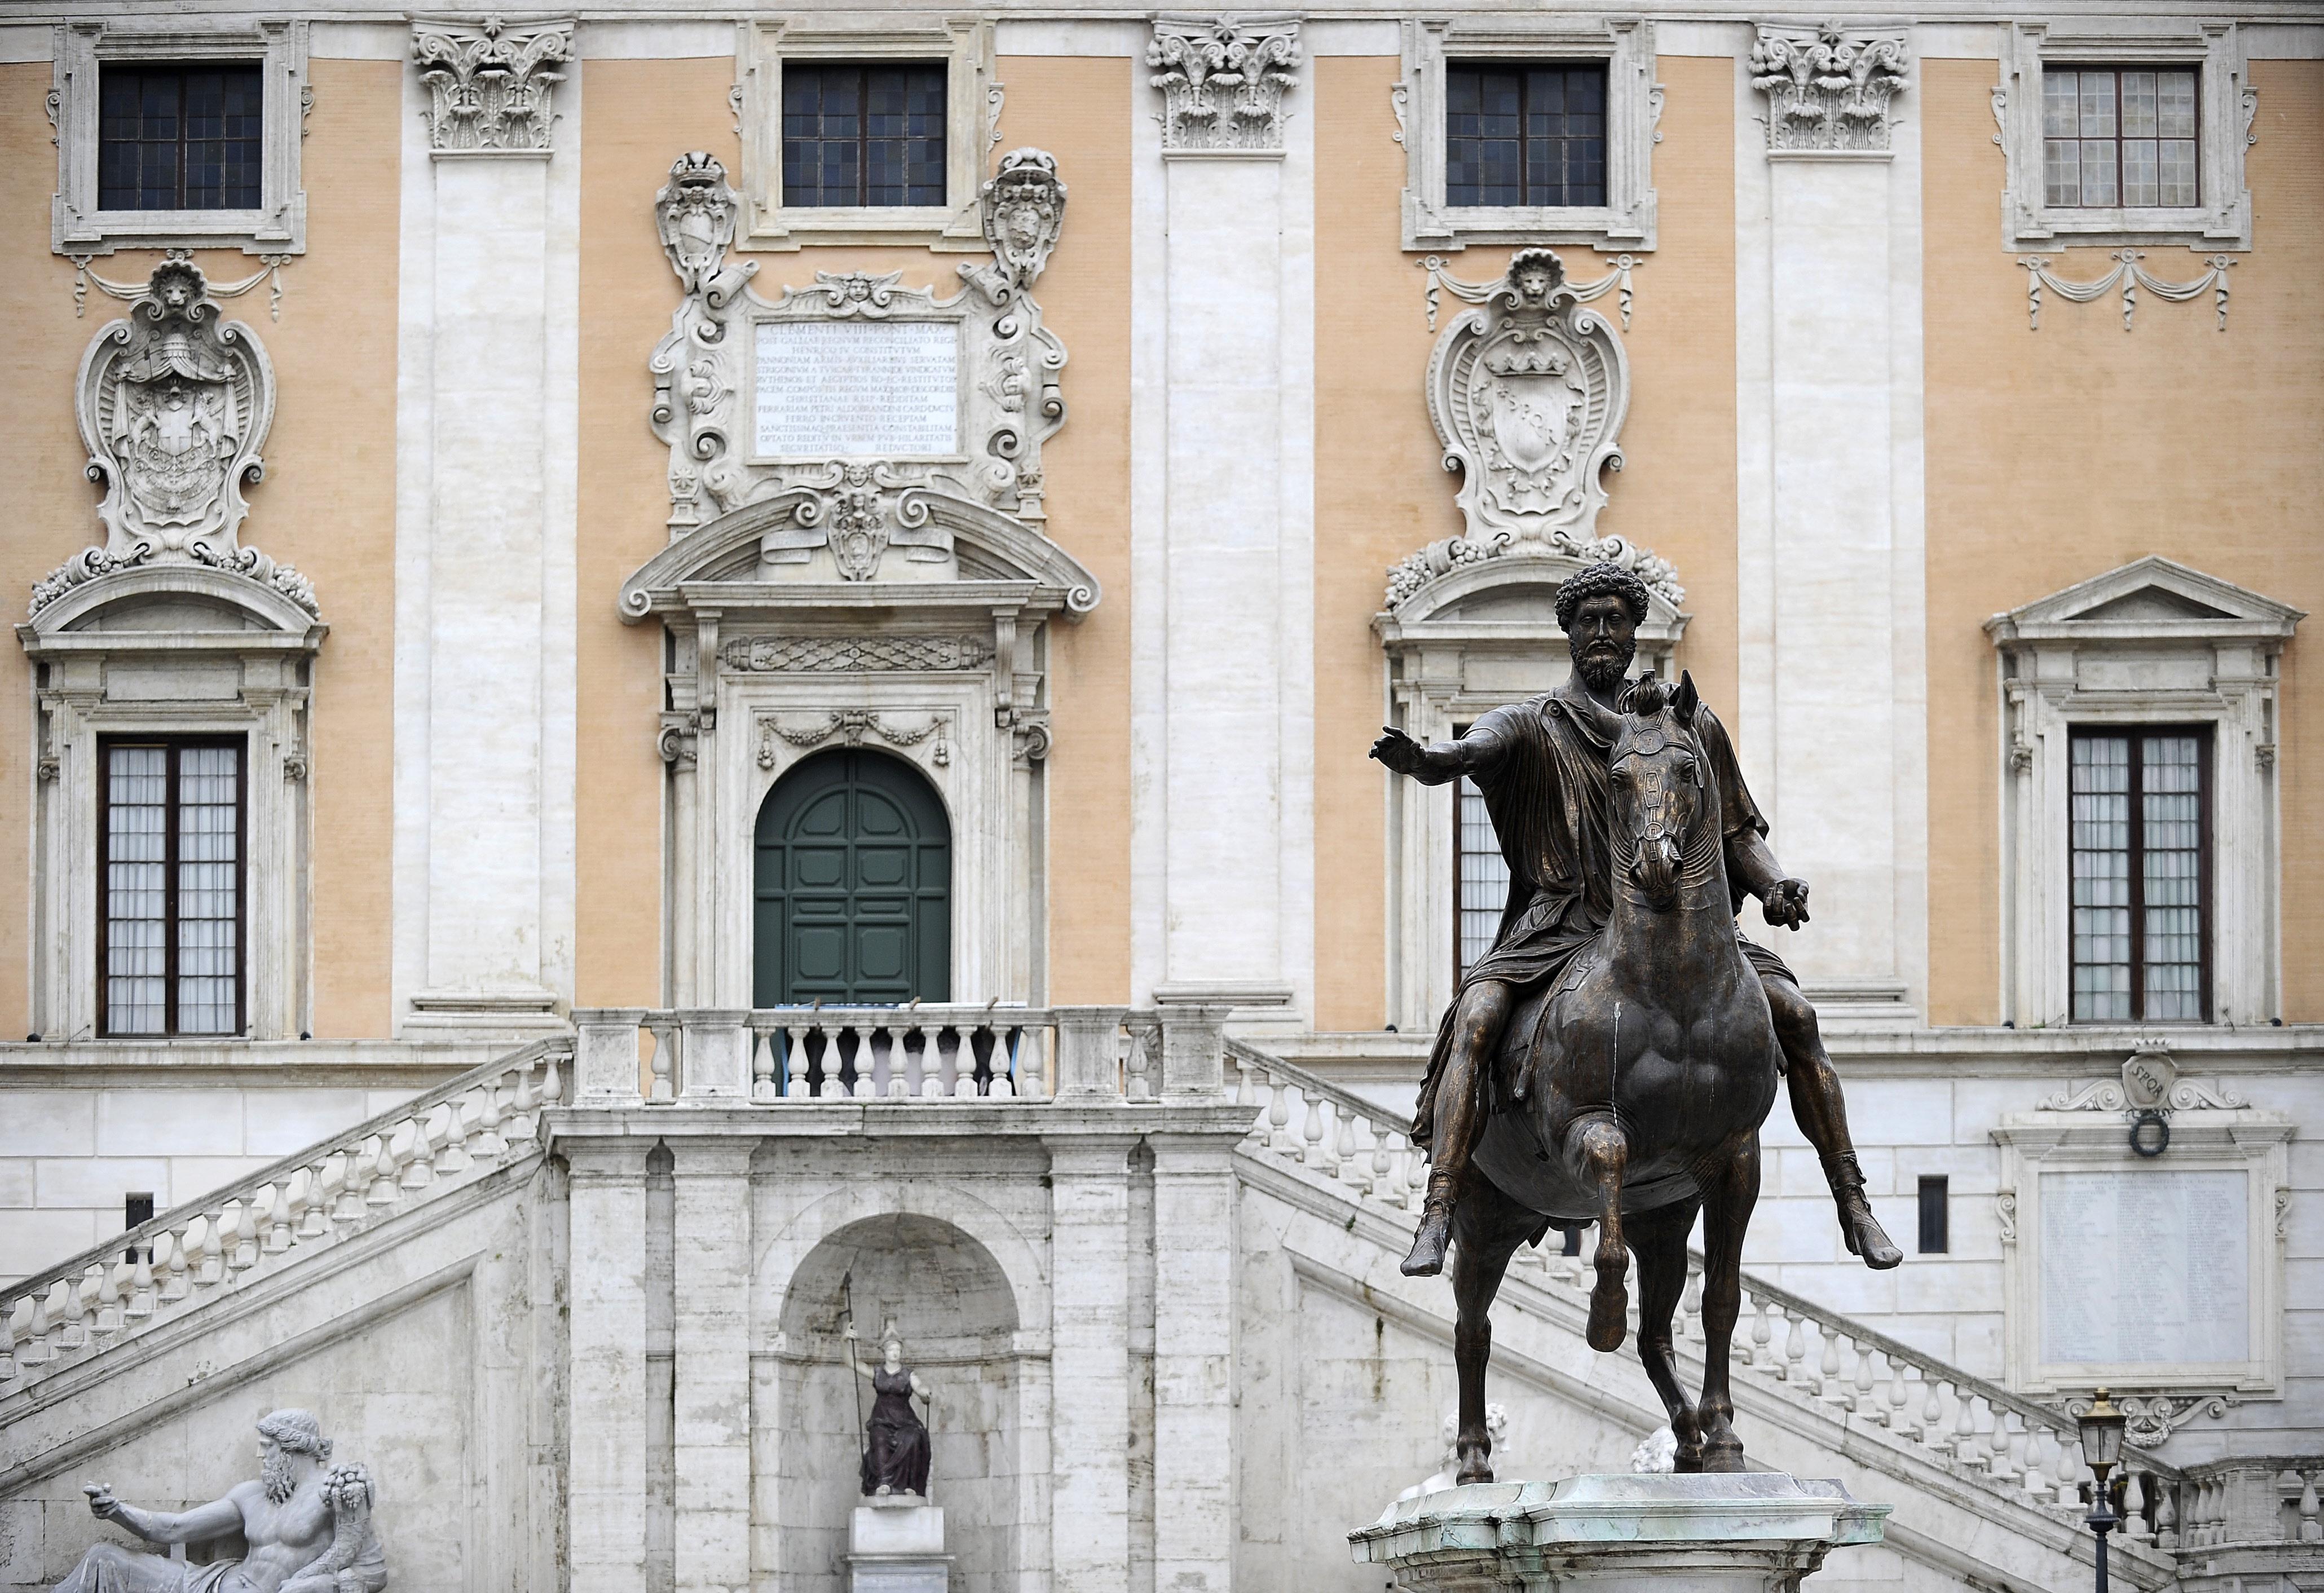 A statue of Marcus Aurelius on a horse in front of a building.